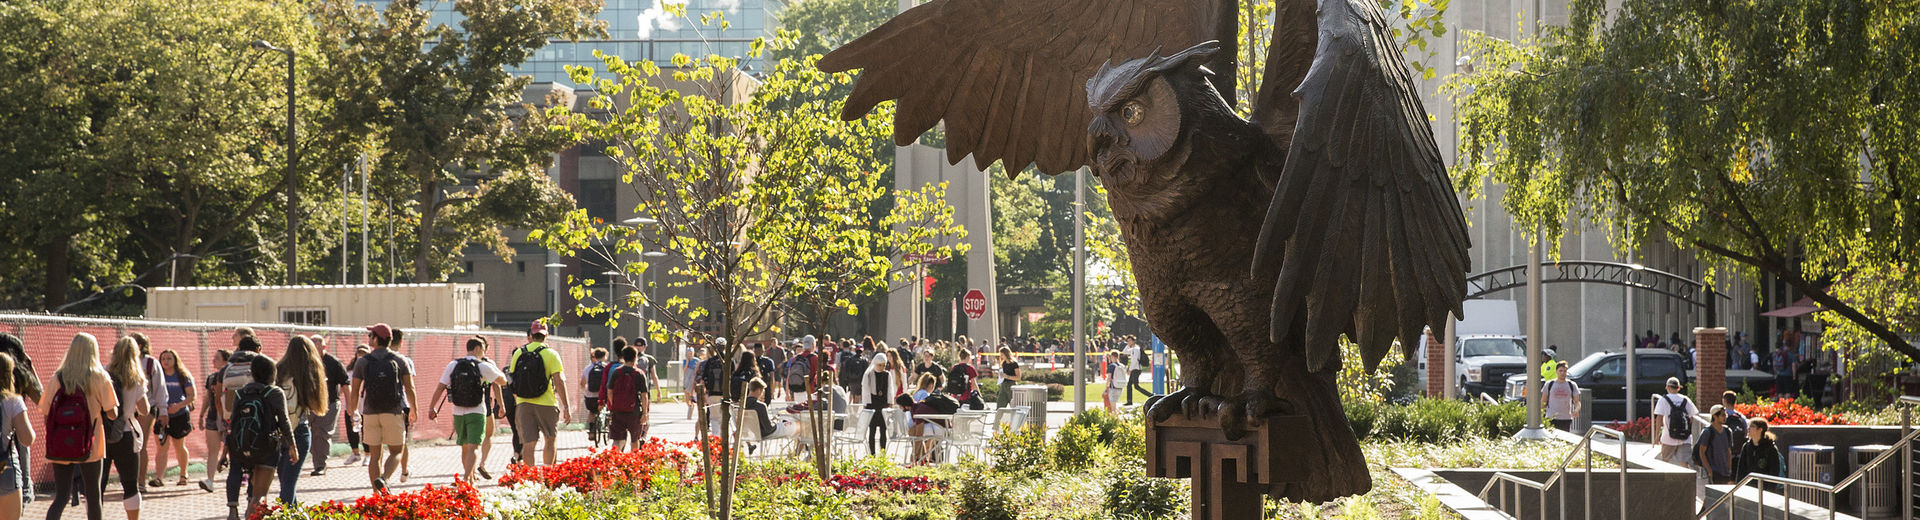 Owl statue in O'Connor Plaza on Main Campus. 